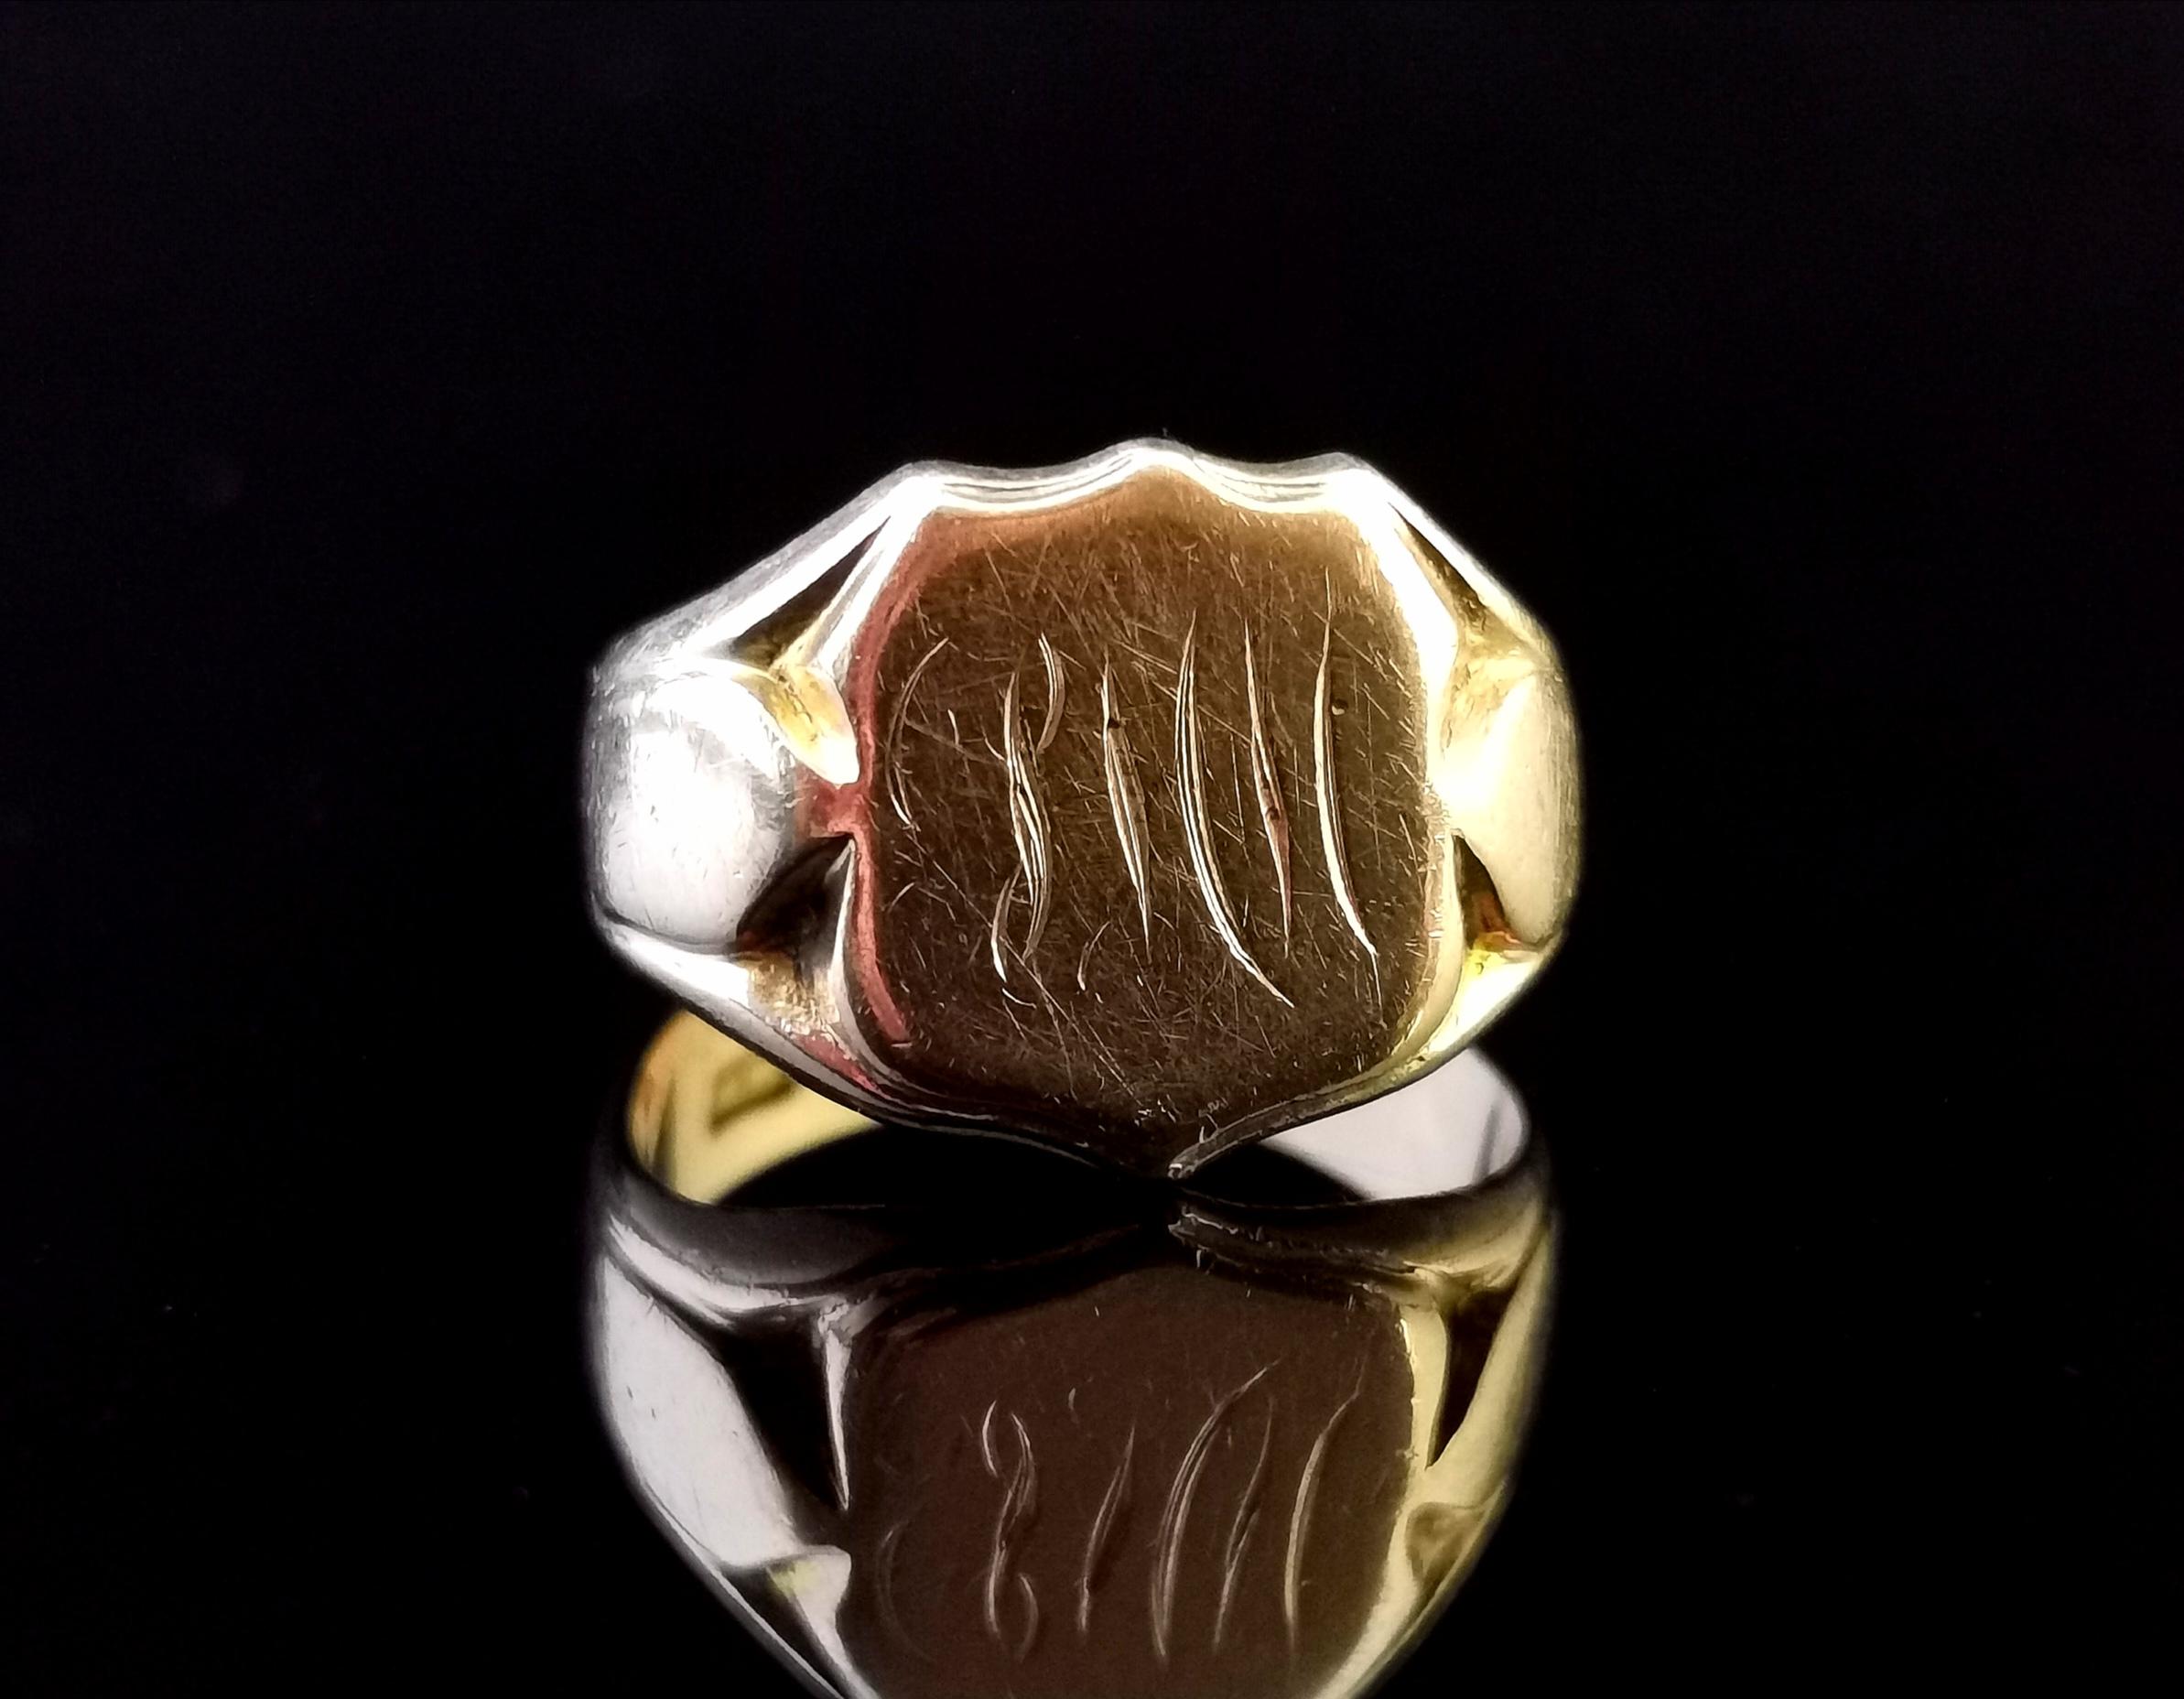 A gorgeous antique 9 karat Rose gold signet ring. 

It has a shield shaped face with an engraved monogram of initials, this is a little worn but I believe it is SMM. 

It has a smooth tapered gold band with decorative grooved shoulders. 

Fully